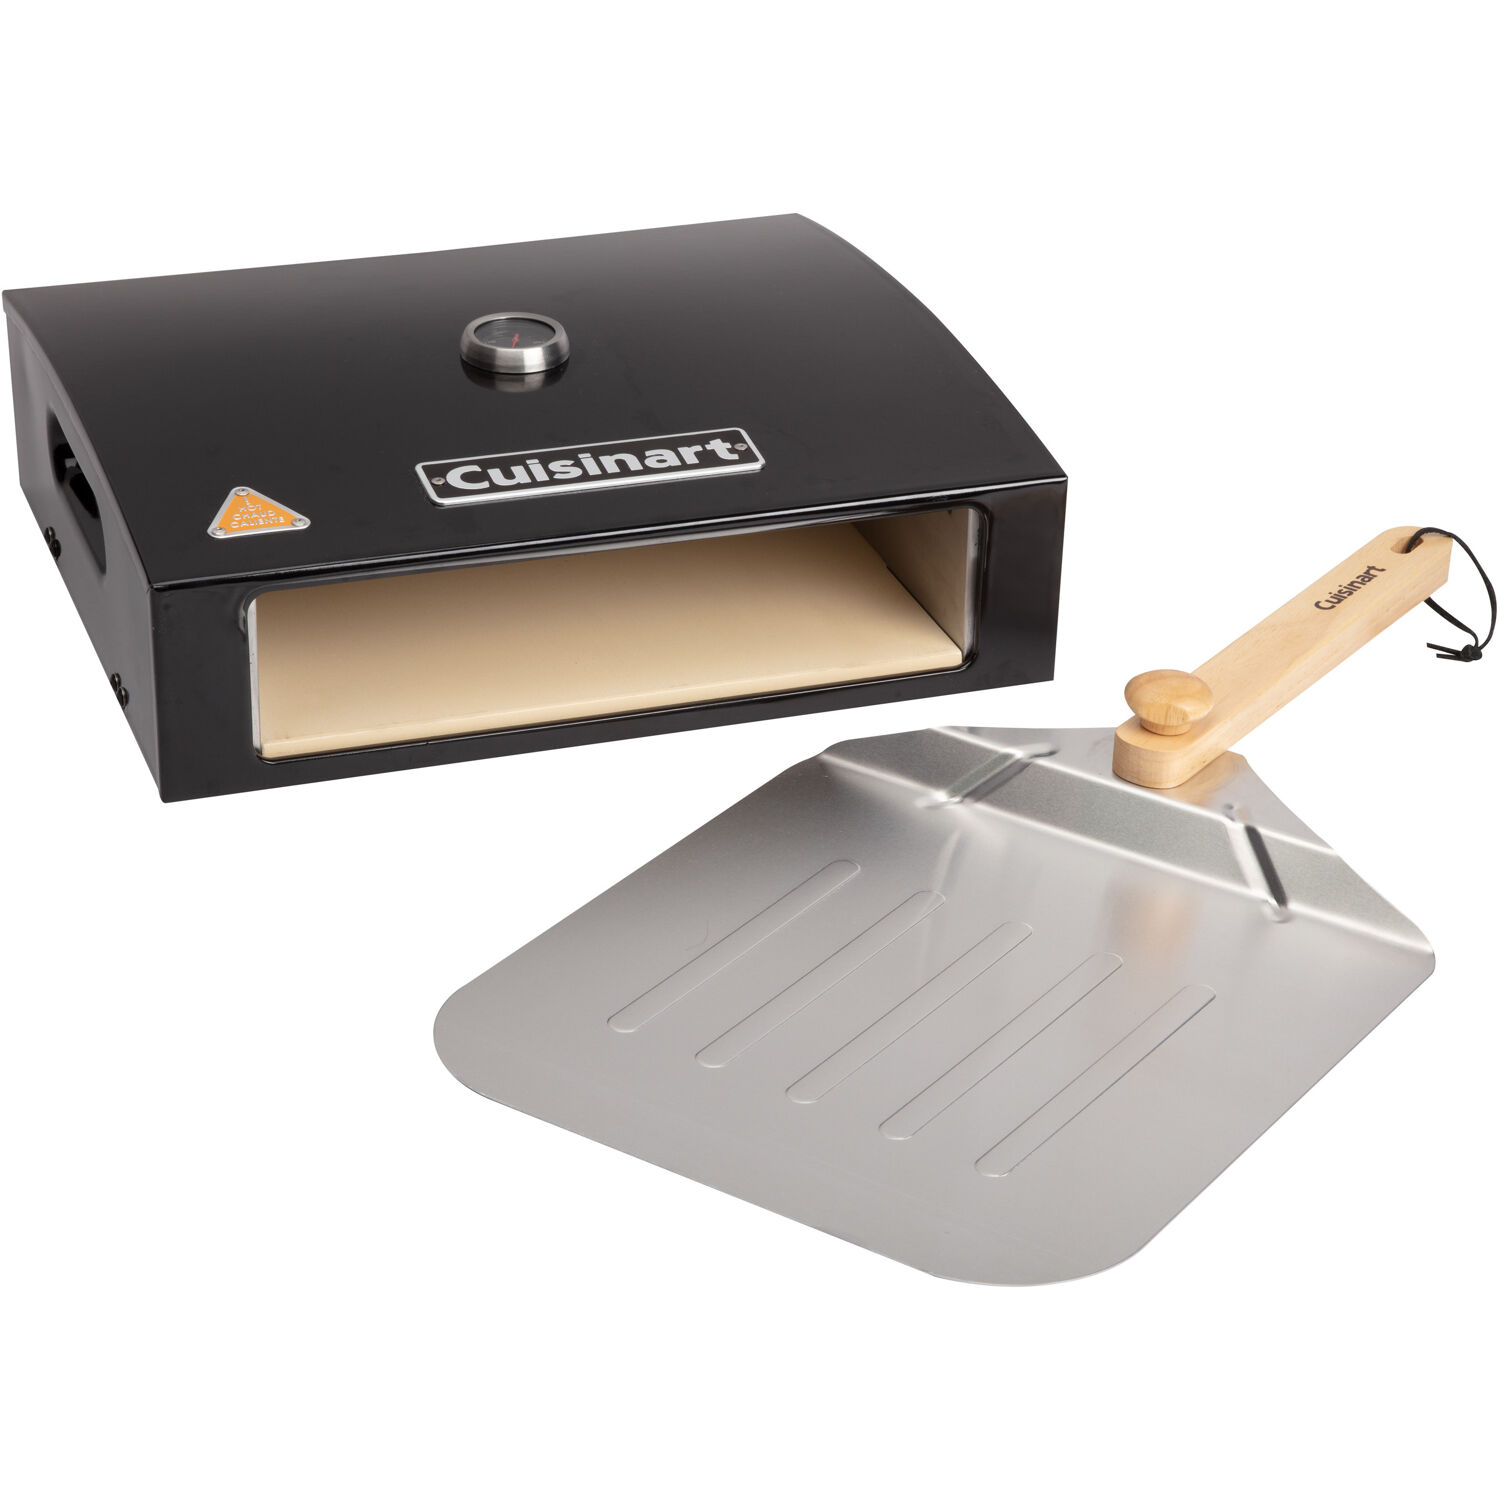 Cuisinart Grill Top Pizza Oven Kit - image 3 of 9